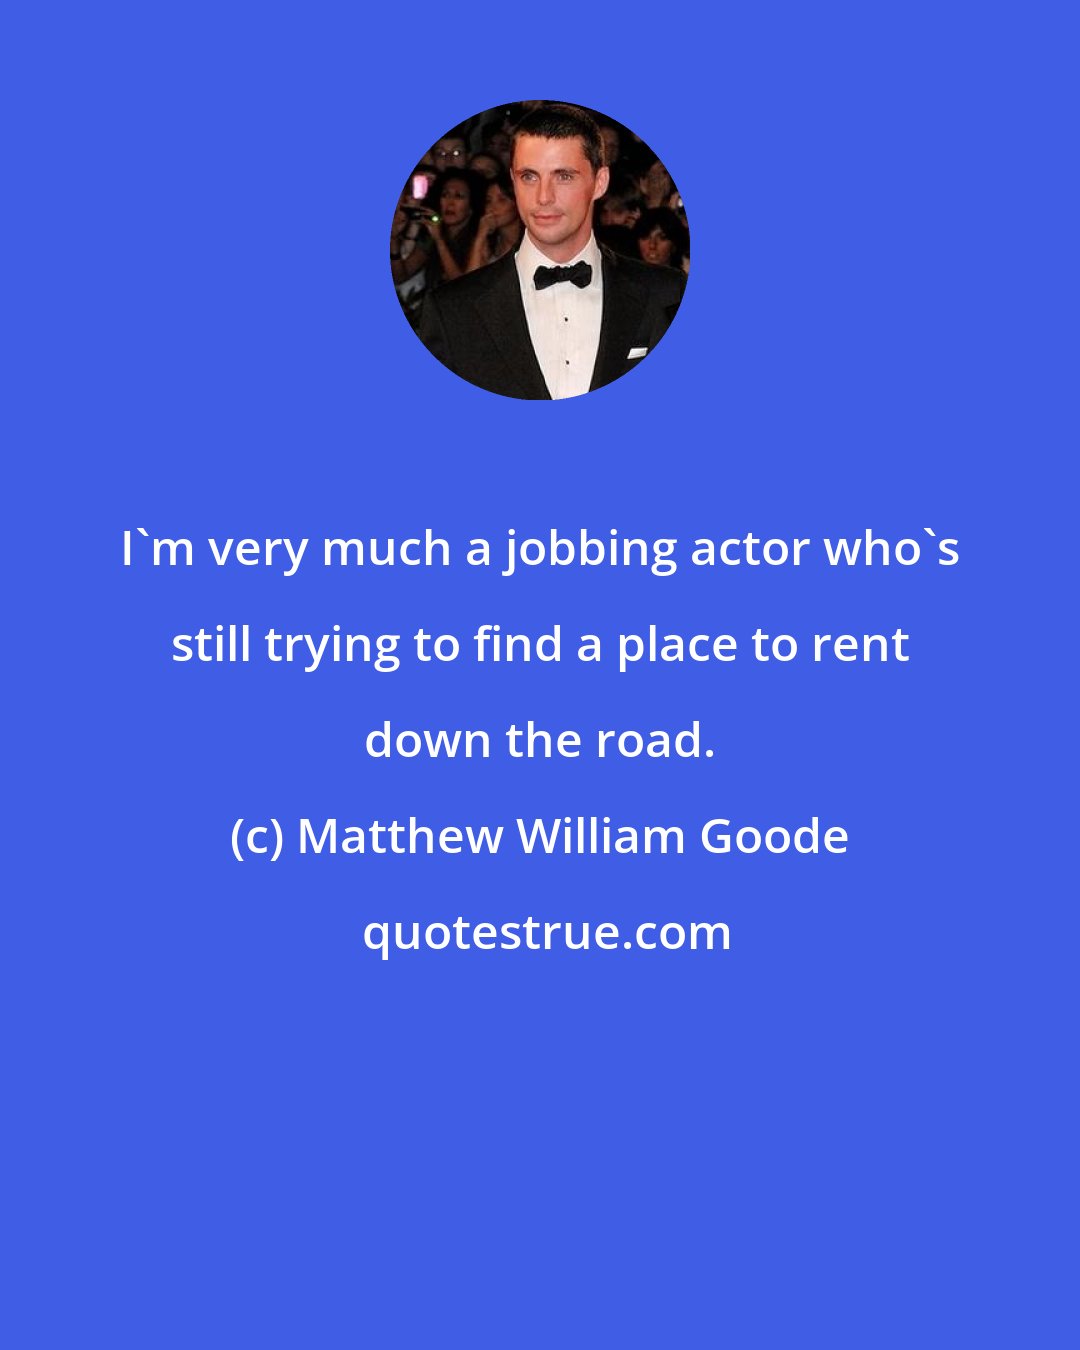 Matthew William Goode: I'm very much a jobbing actor who's still trying to find a place to rent down the road.